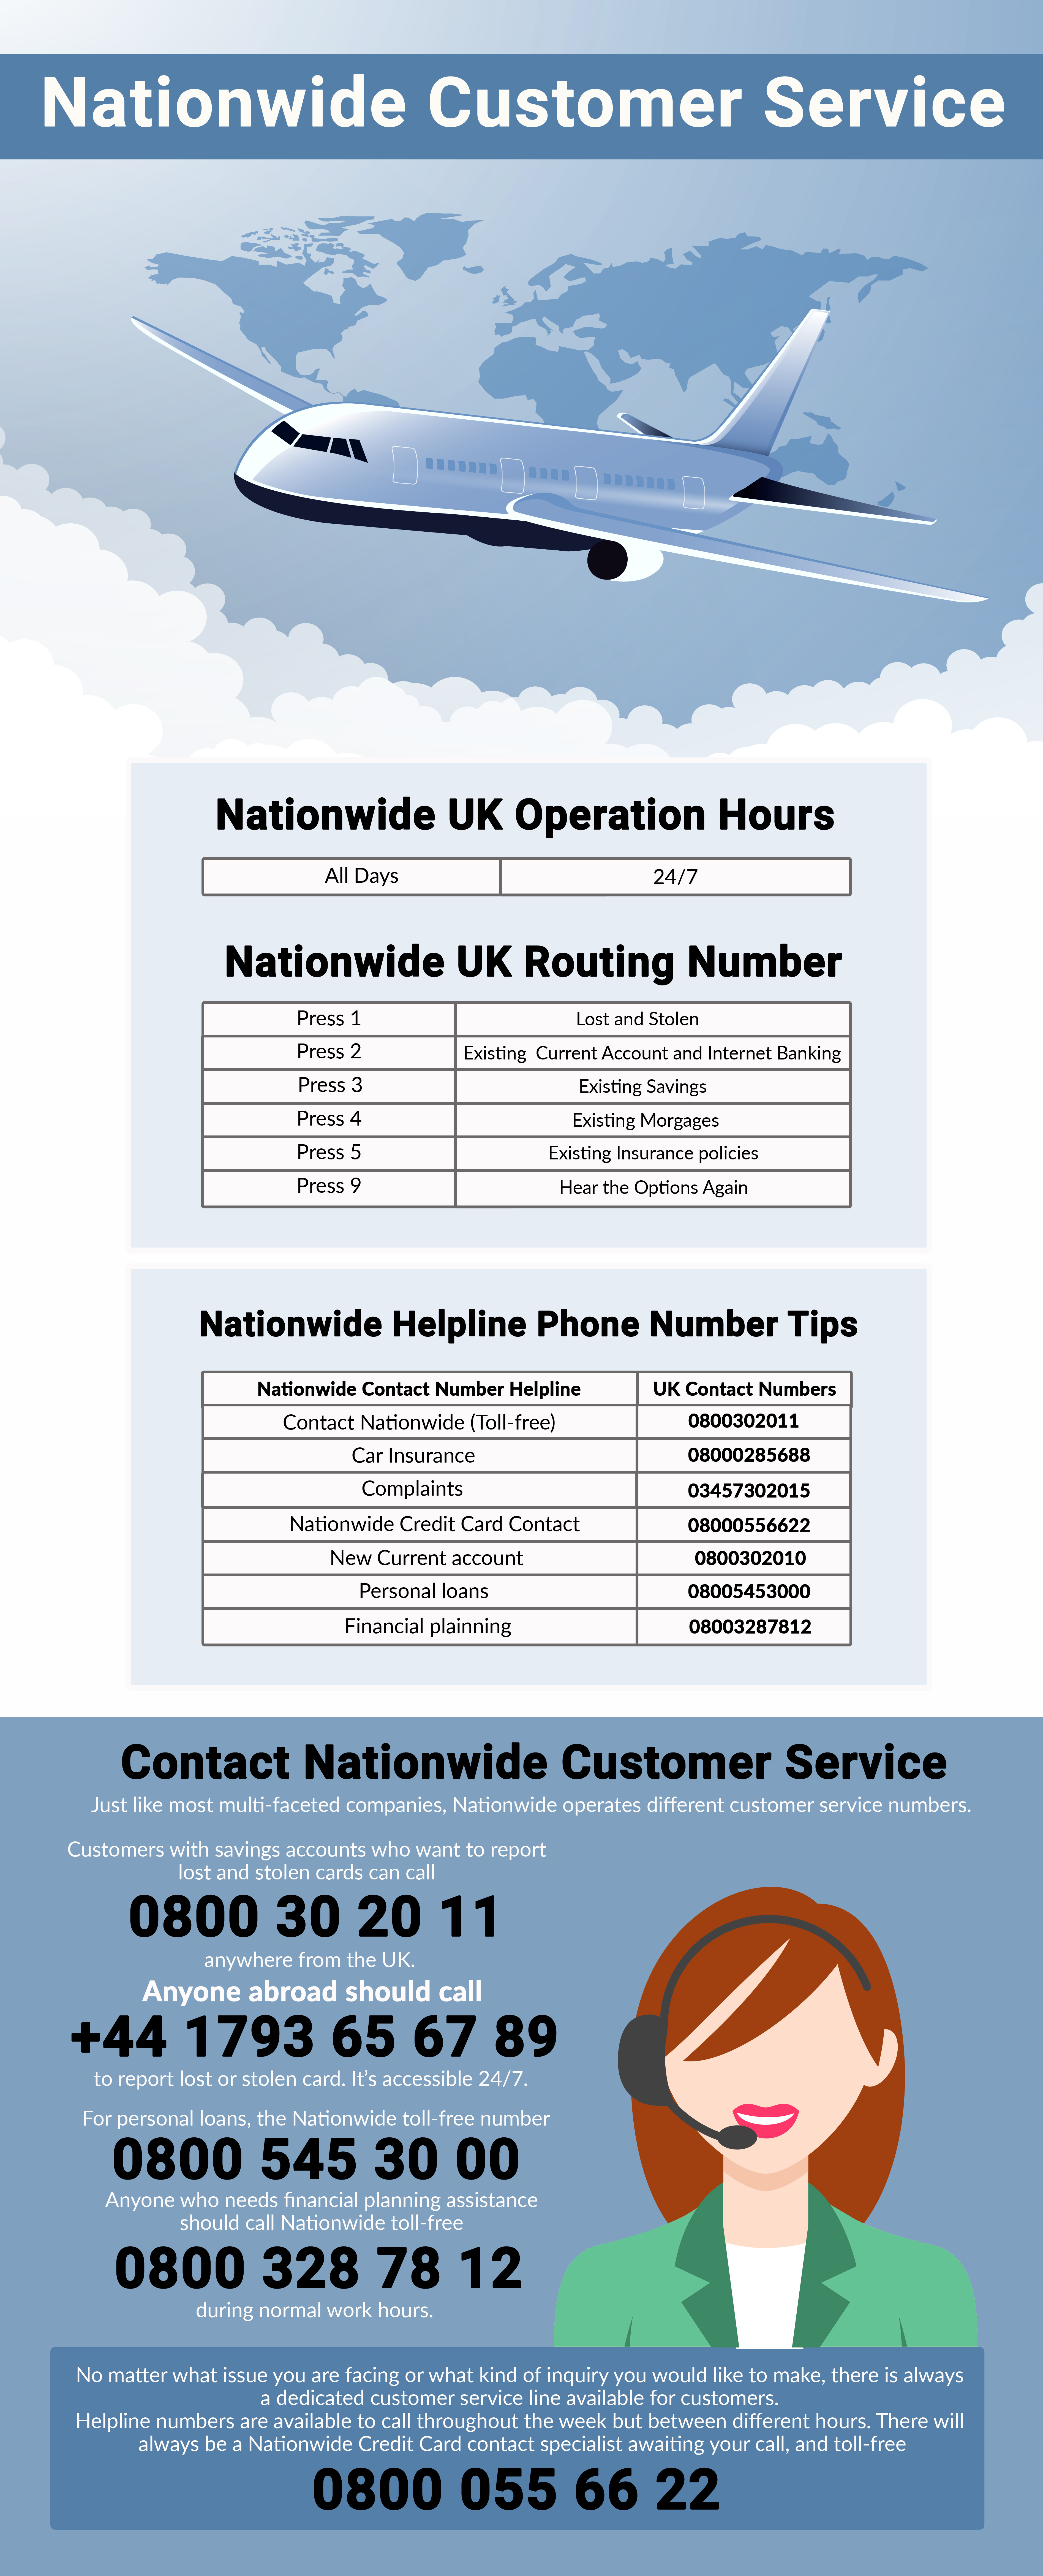 Nationwide Customer Service Contact Number